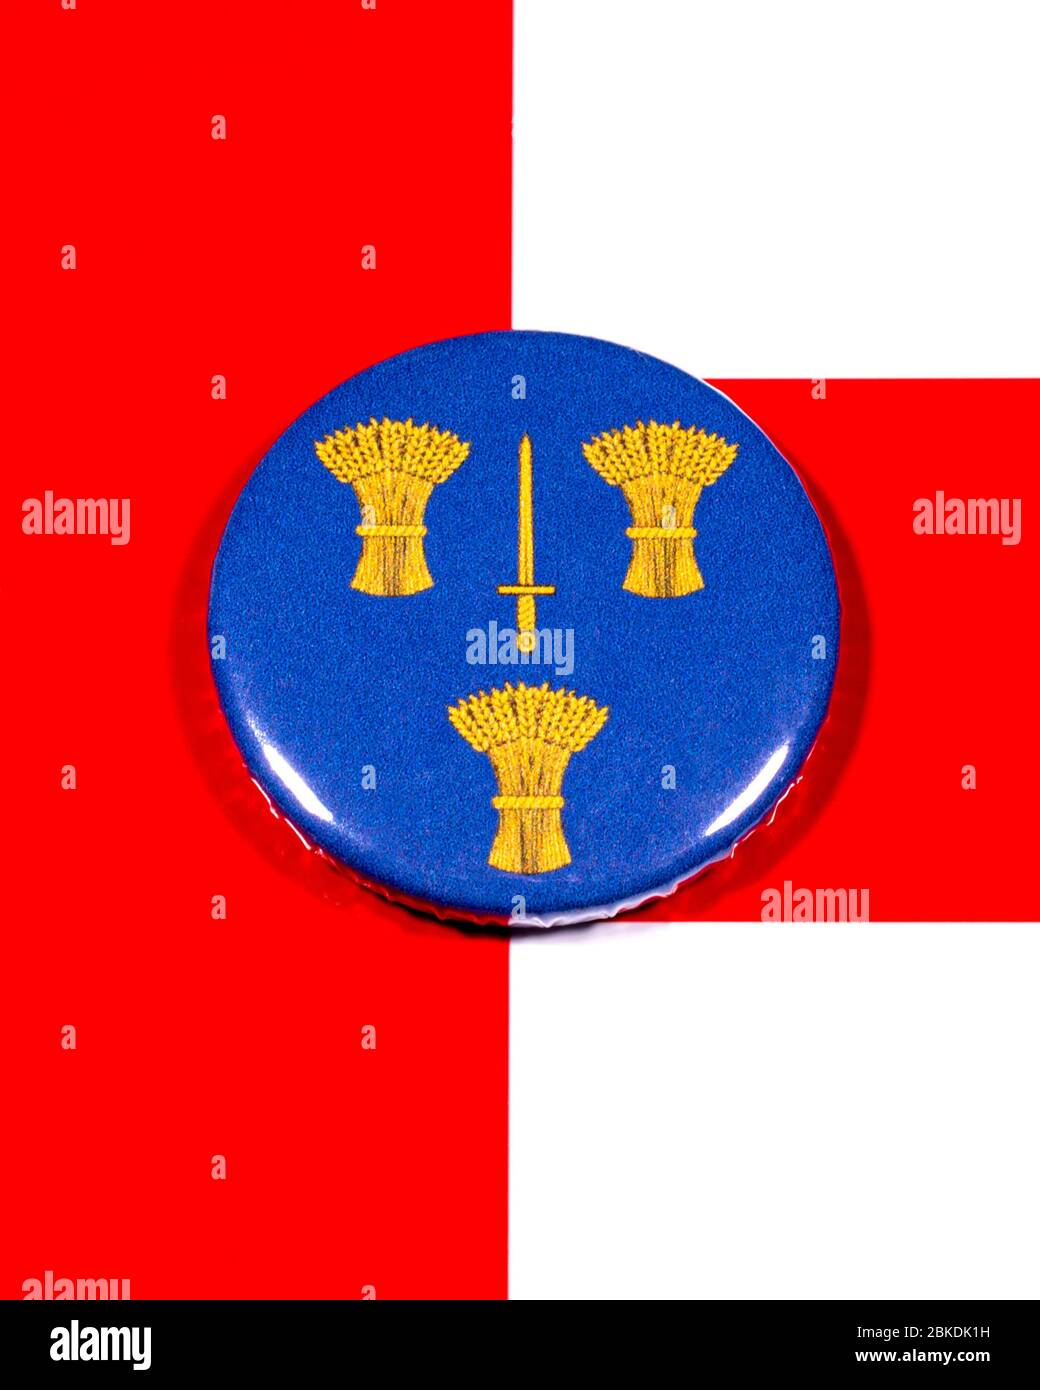 A badge portraying the flag of the English county of Cheshire pictured over the England flag. Stock Photo